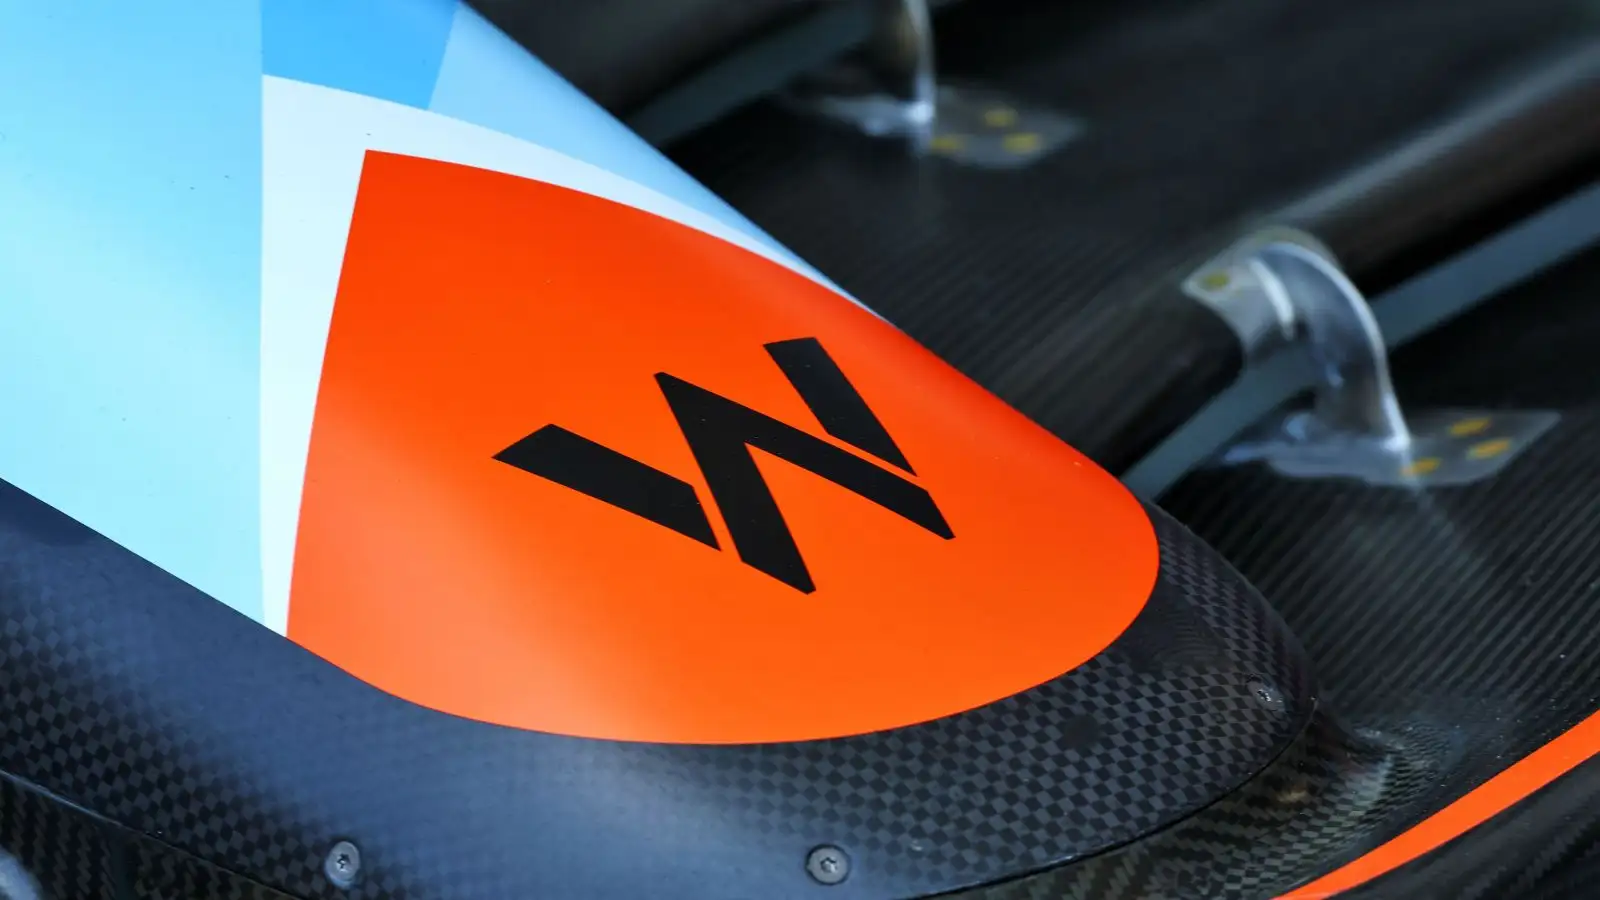 Williams' Gulf livery appears for the first time ahead of the Singapore Grand Prix.